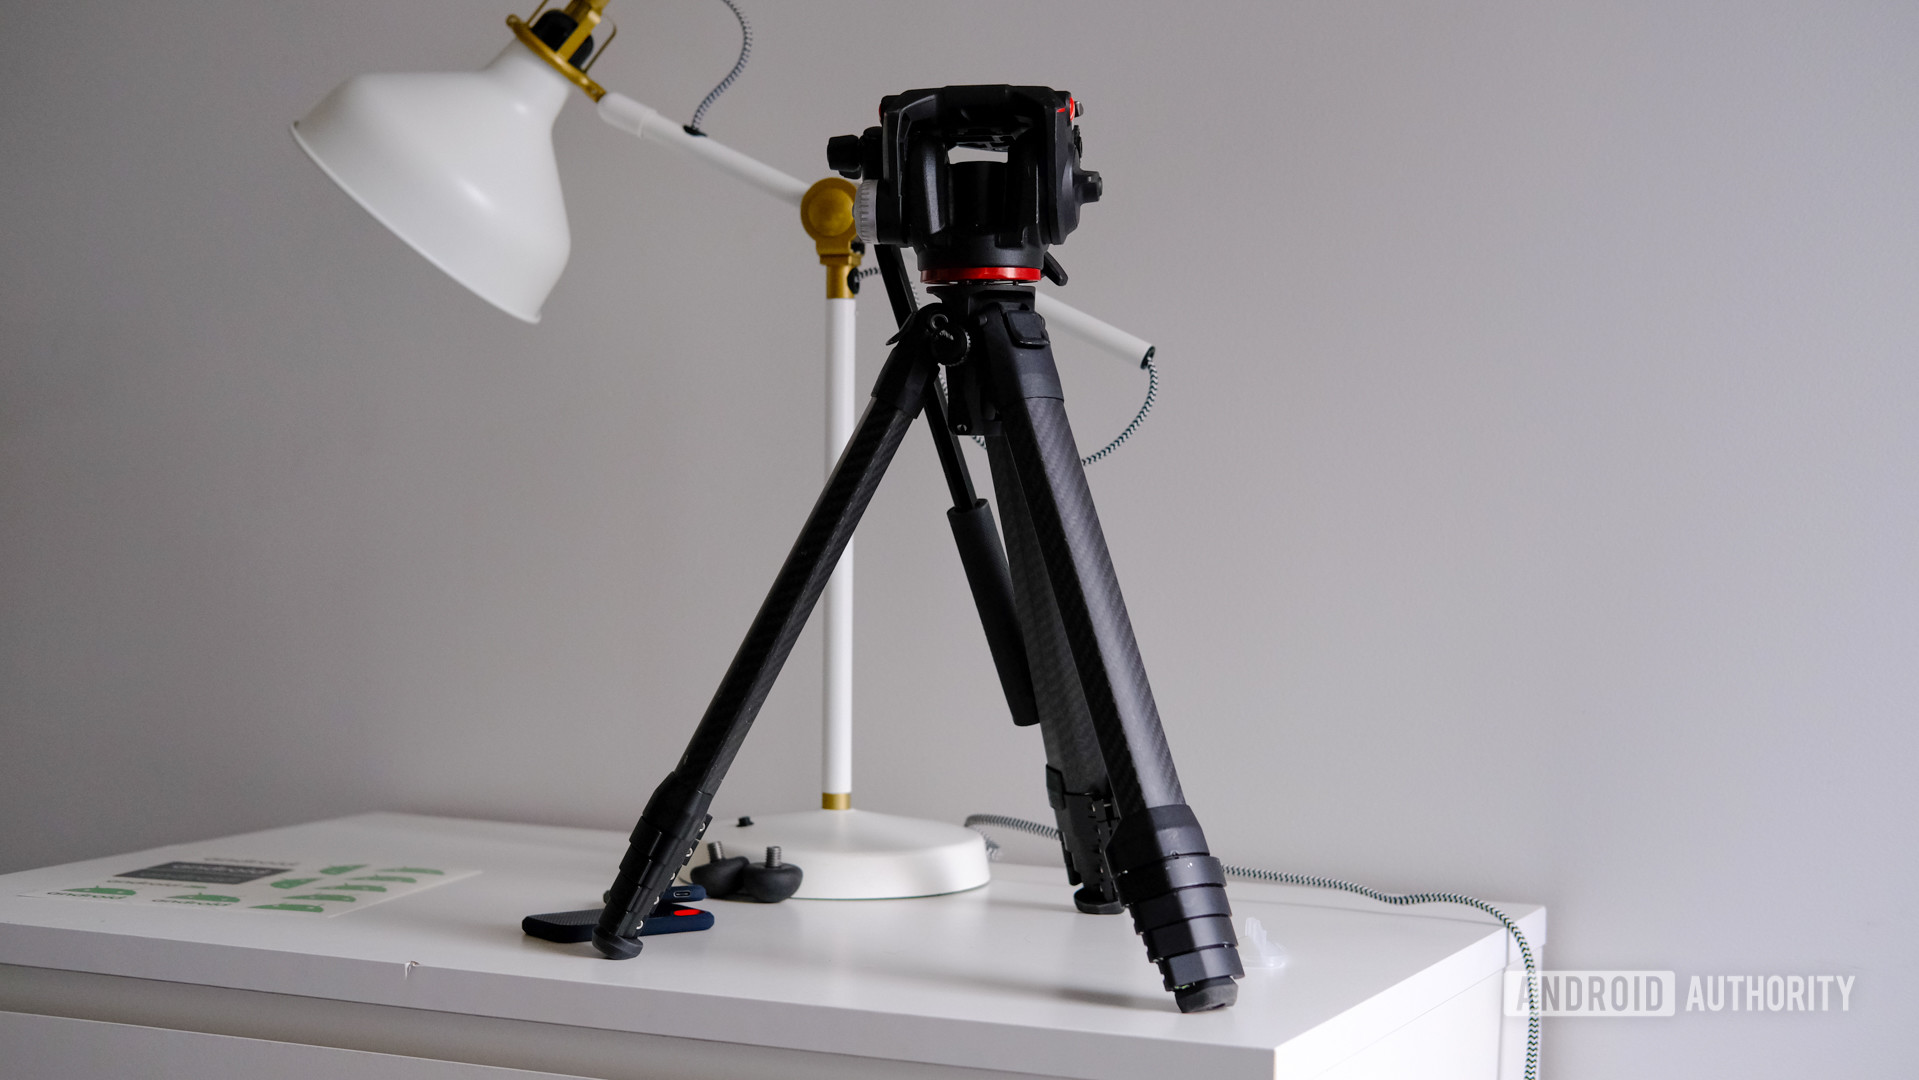 Peak Design Tripod and Manfroto XPRO head on table - Photography terms you should know